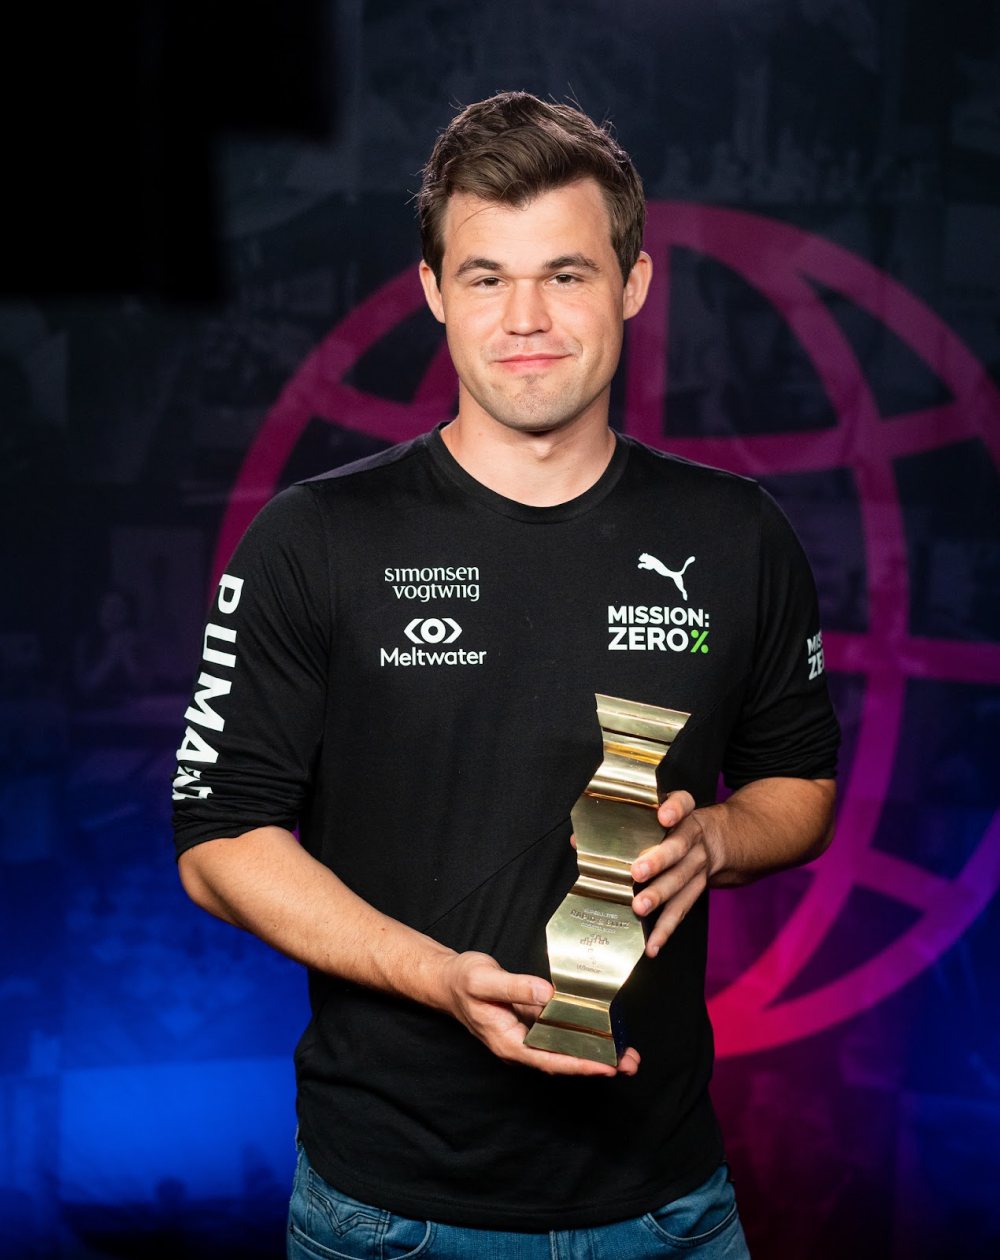 World Champion Magnus Carlsen Joins SuperUnited Rapid & Blitz Croatia for  the Third Leg of the 2022 Grand Chess Tour in Zagreb